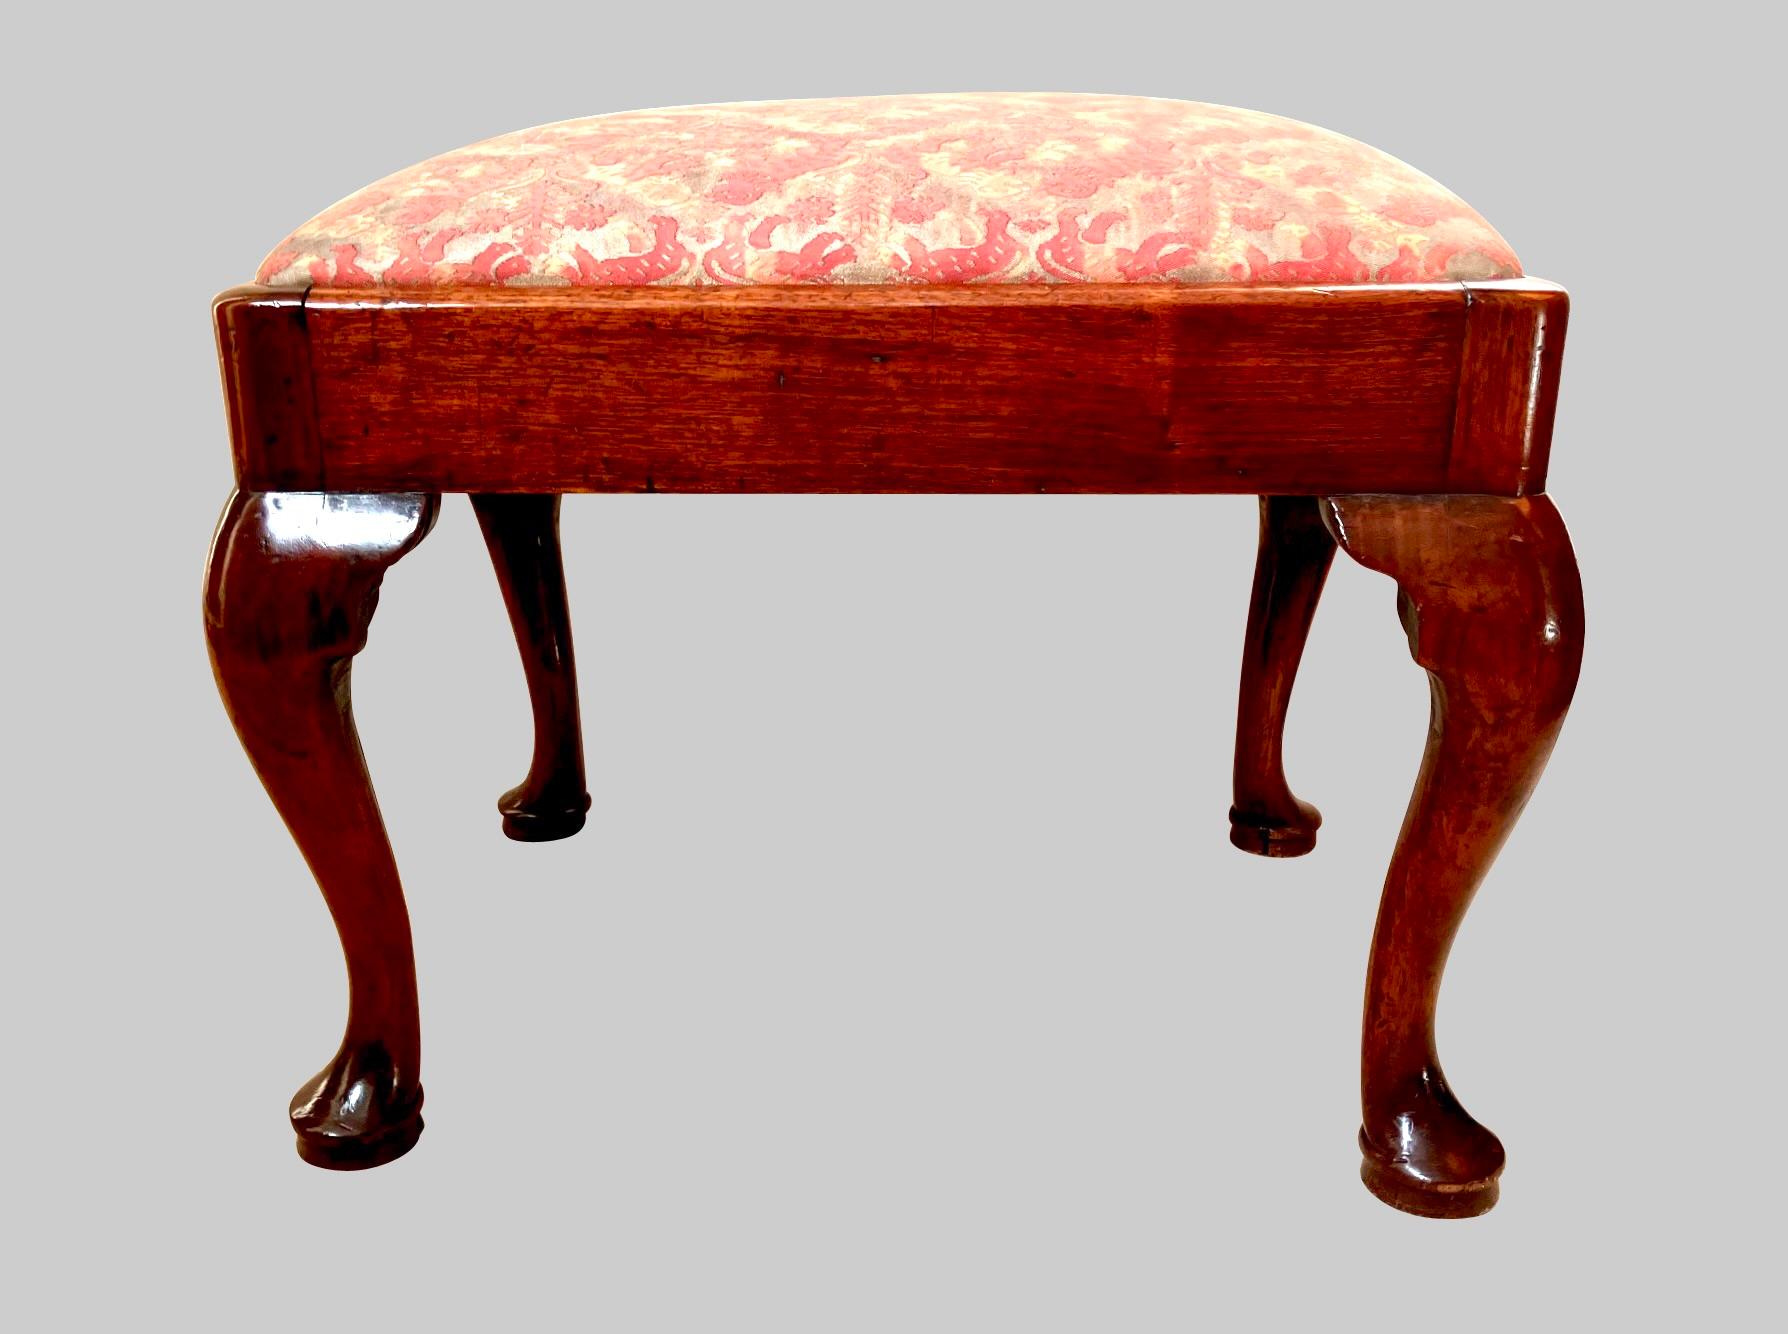 English George I Period Small Bench Now Upholstered in Fortuny Fabric  In Good Condition For Sale In San Francisco, CA